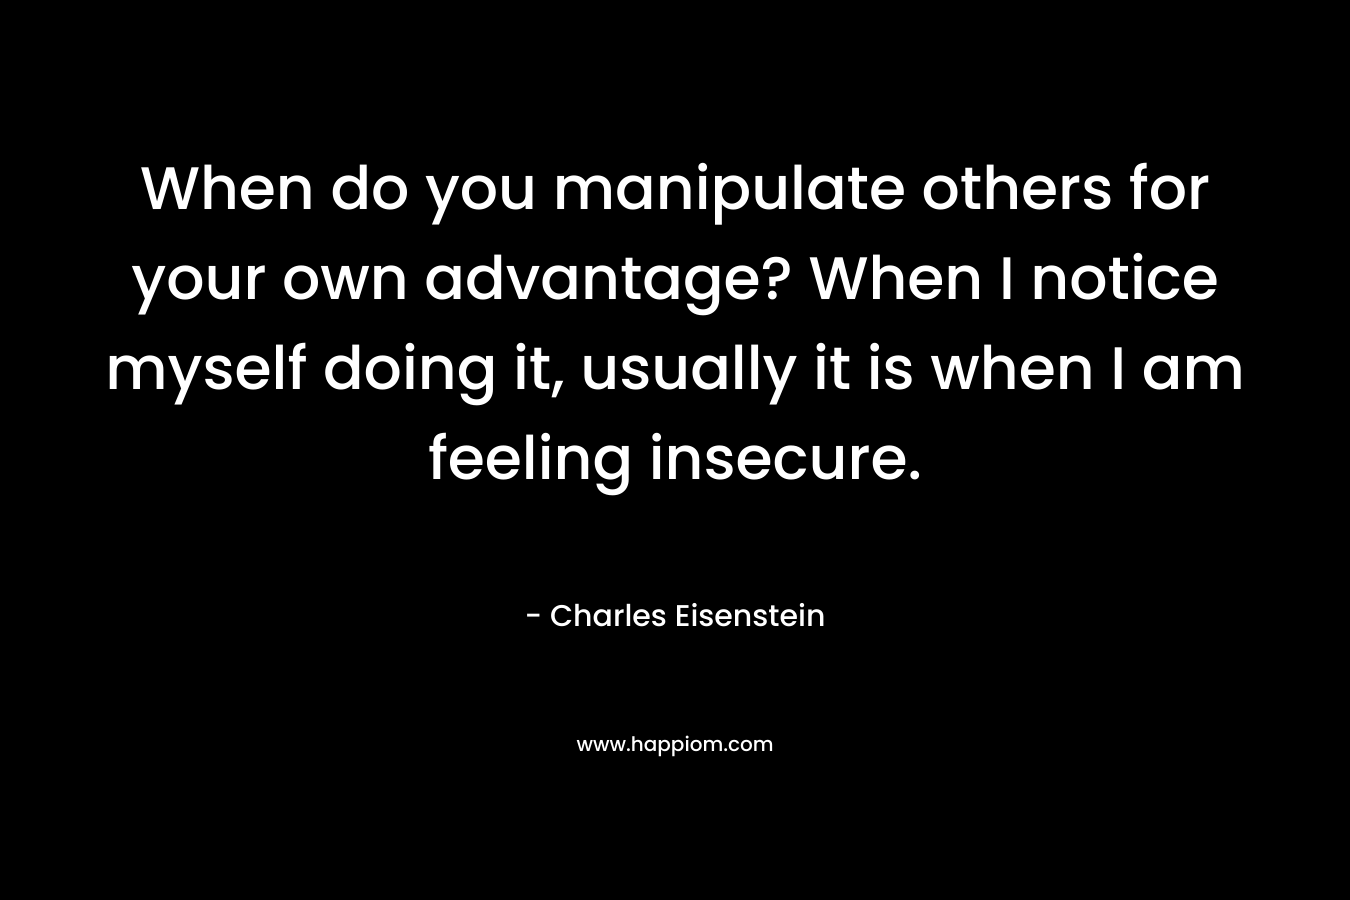 When do you manipulate others for your own advantage? When I notice myself doing it, usually it is when I am feeling insecure.